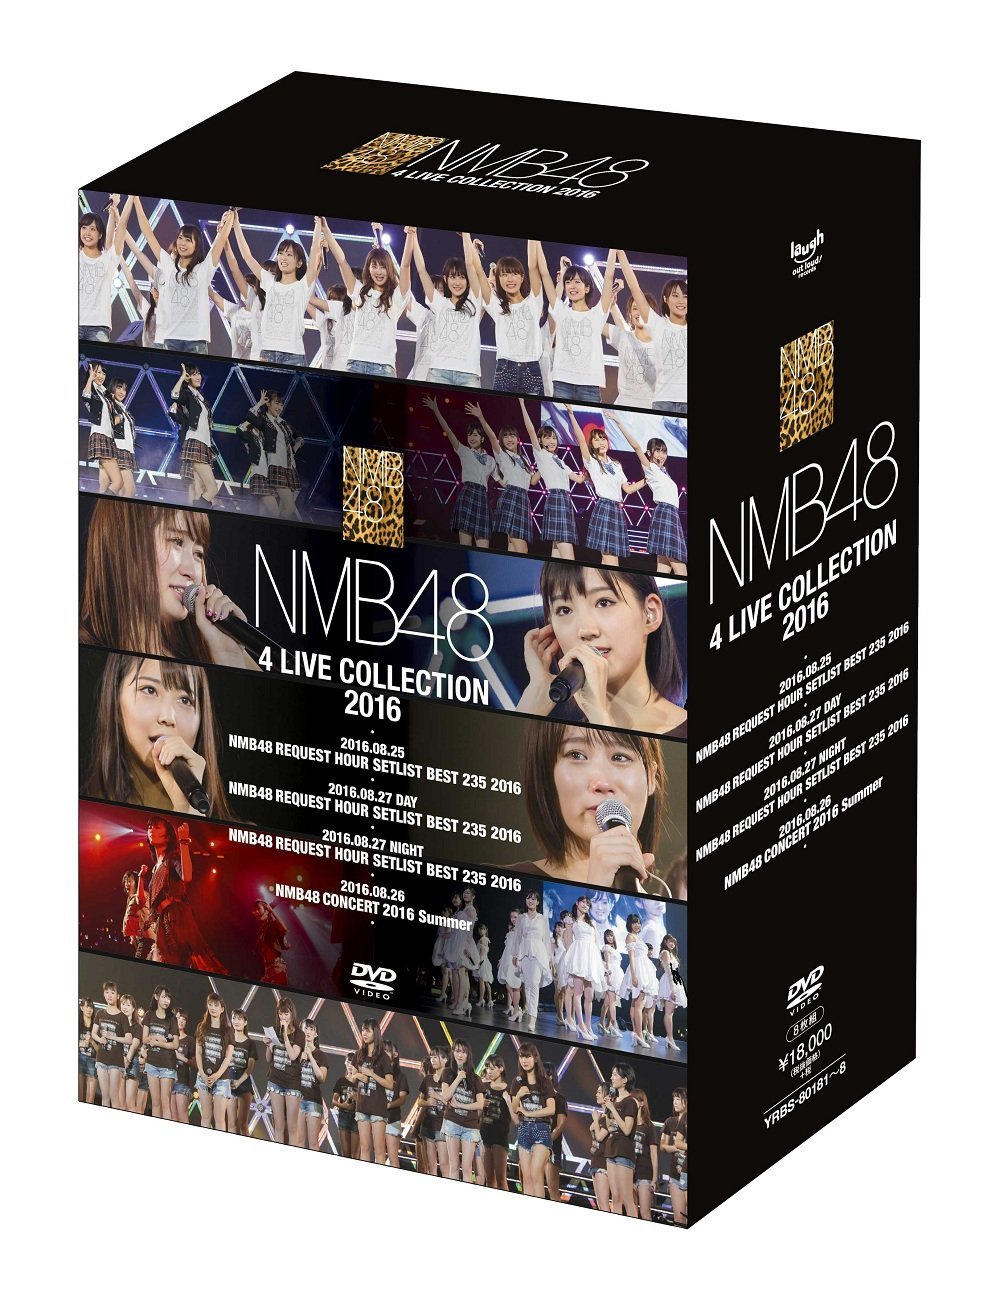 NMB48 4 LIVE COLLECTION 2016 [DVD-BOX] – AKB48LOVER